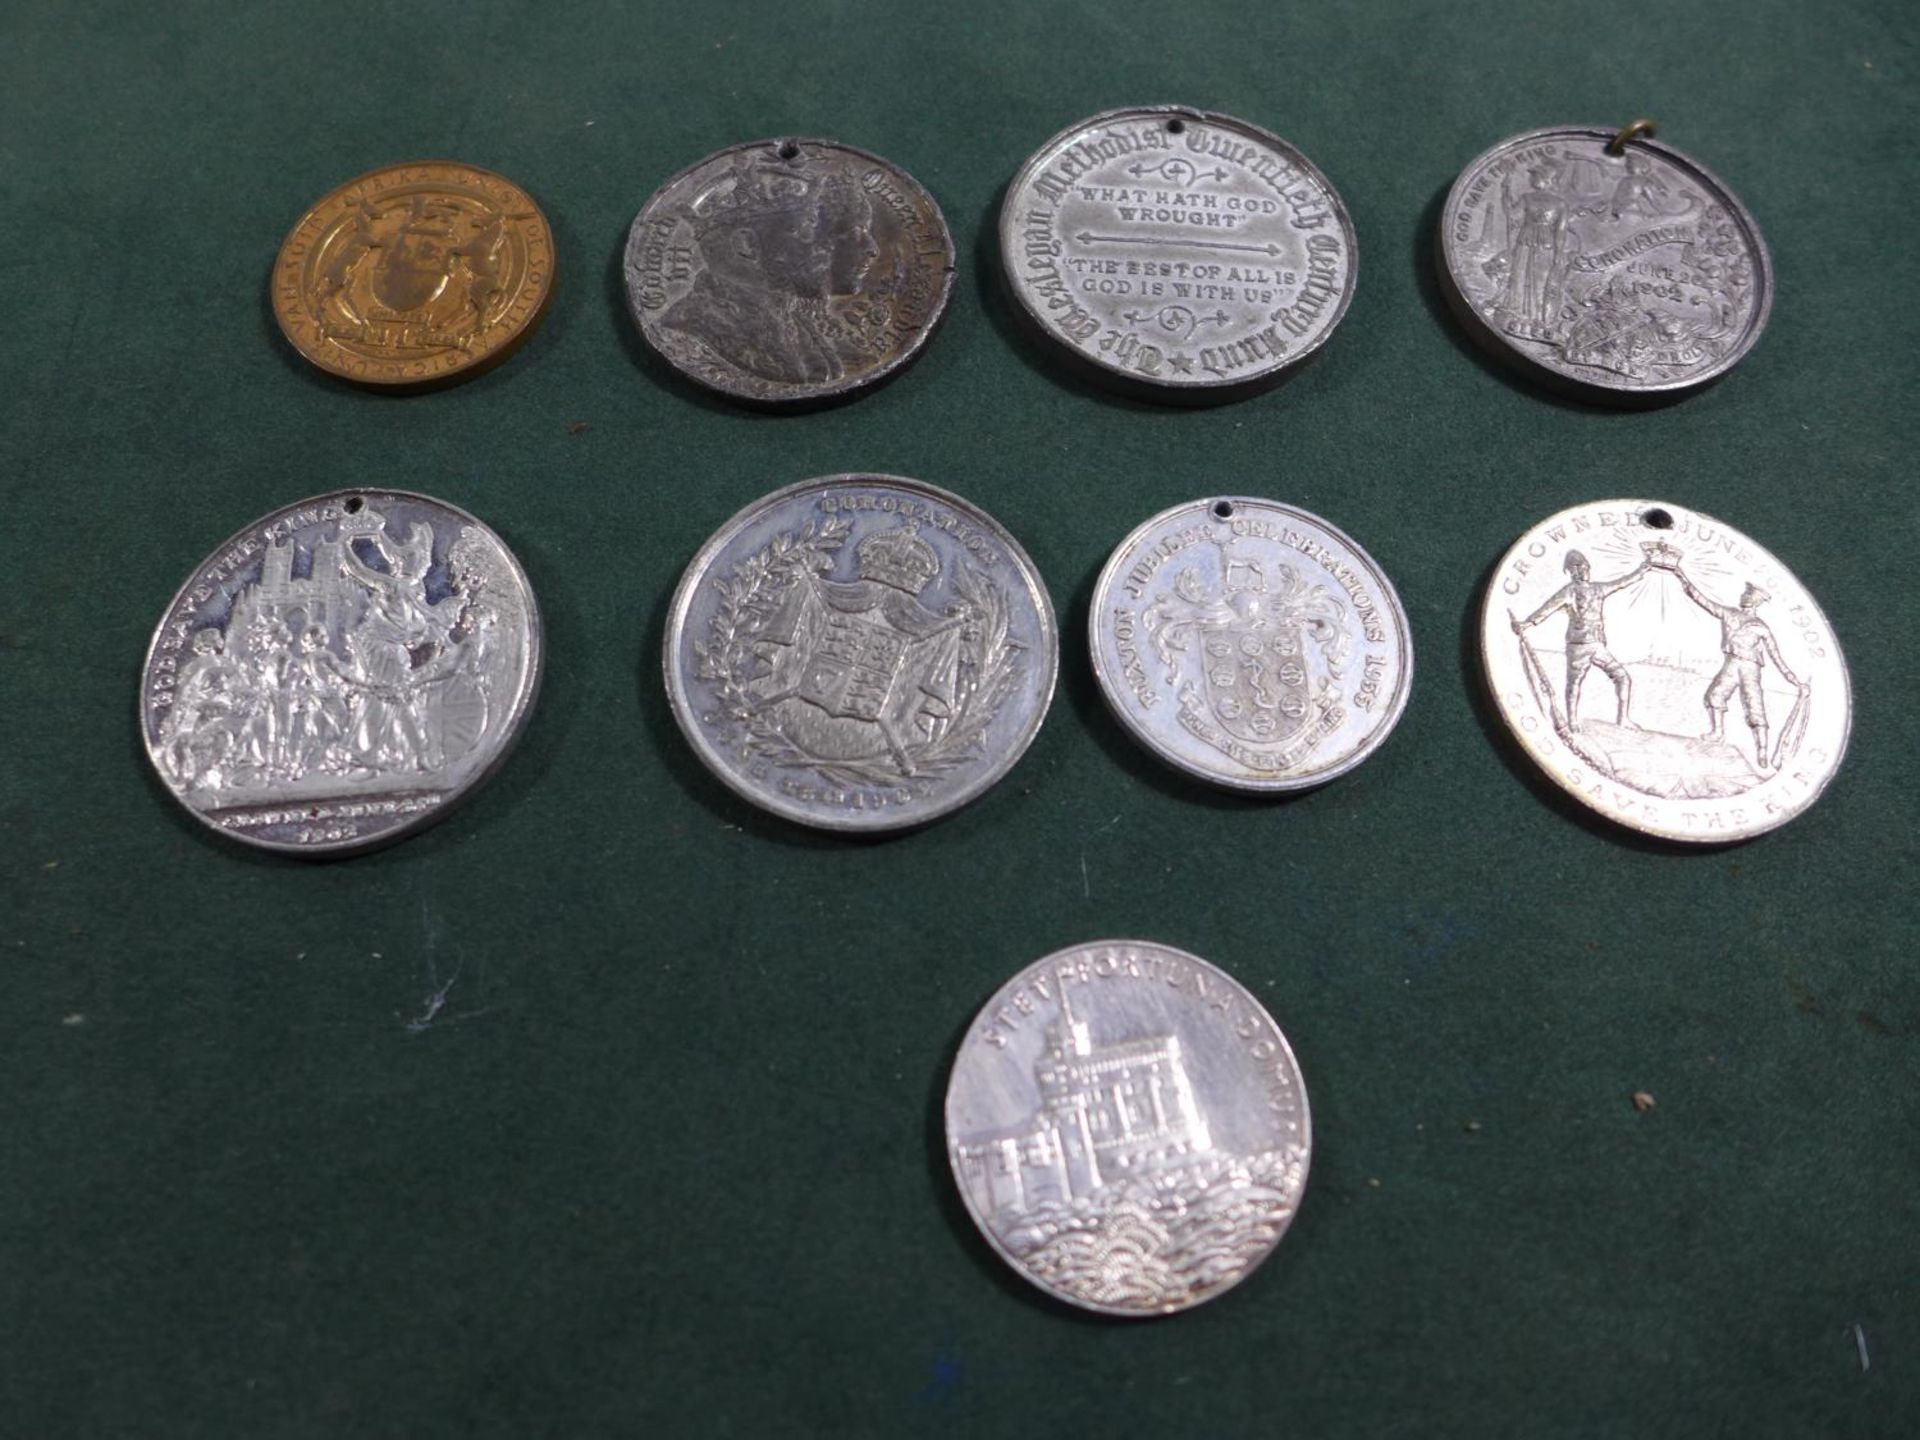 A COLLECTION OF NINE ROYAL FAMILY CORONATION AND JUBILEE MEDALS FOR EDWARD VII AND GEORGE V - Image 2 of 2